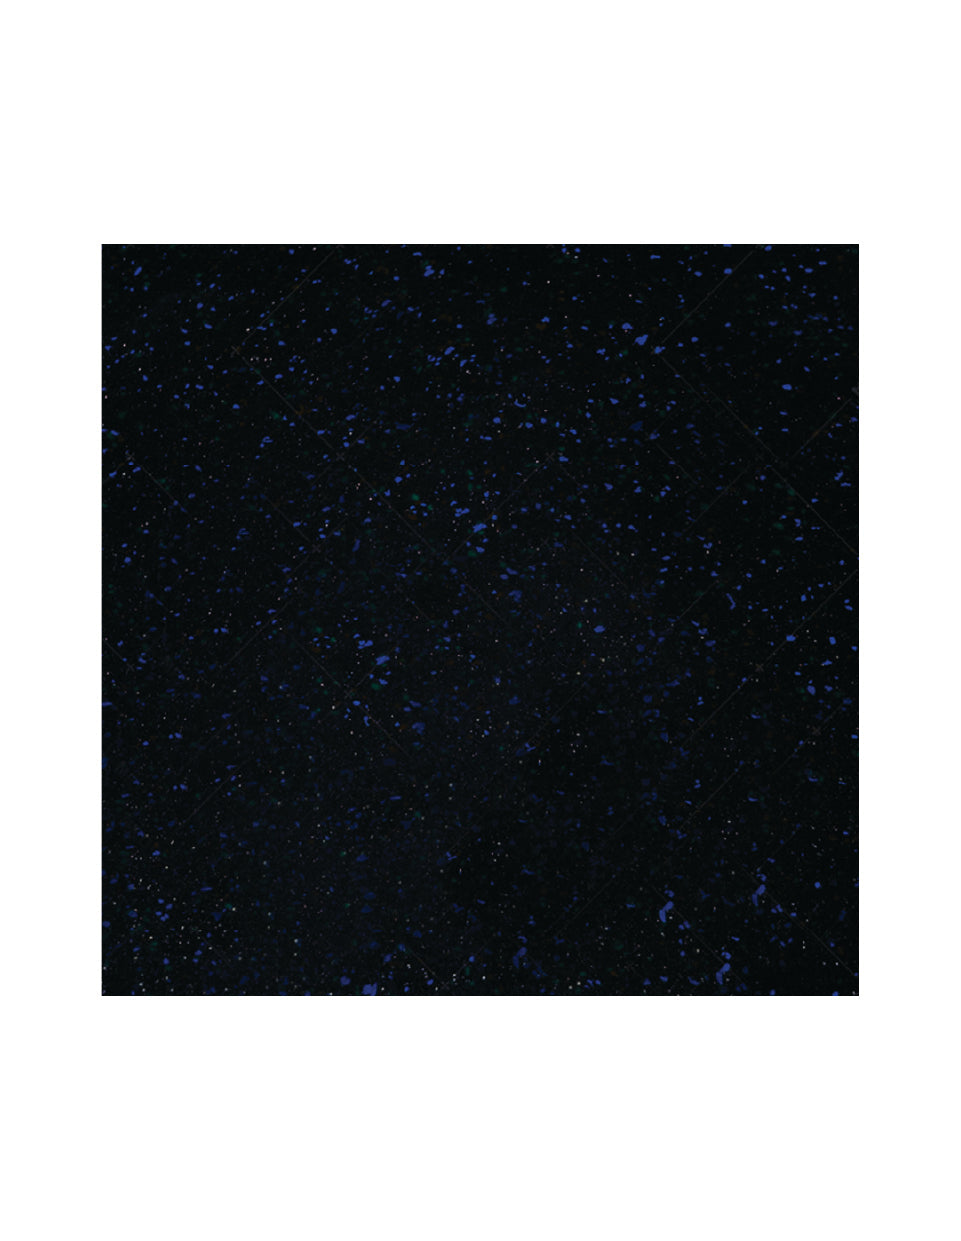 1441 Fitness Speckled Blue Gym Flooring 50 x 50 (cm) - 20mm Thickness